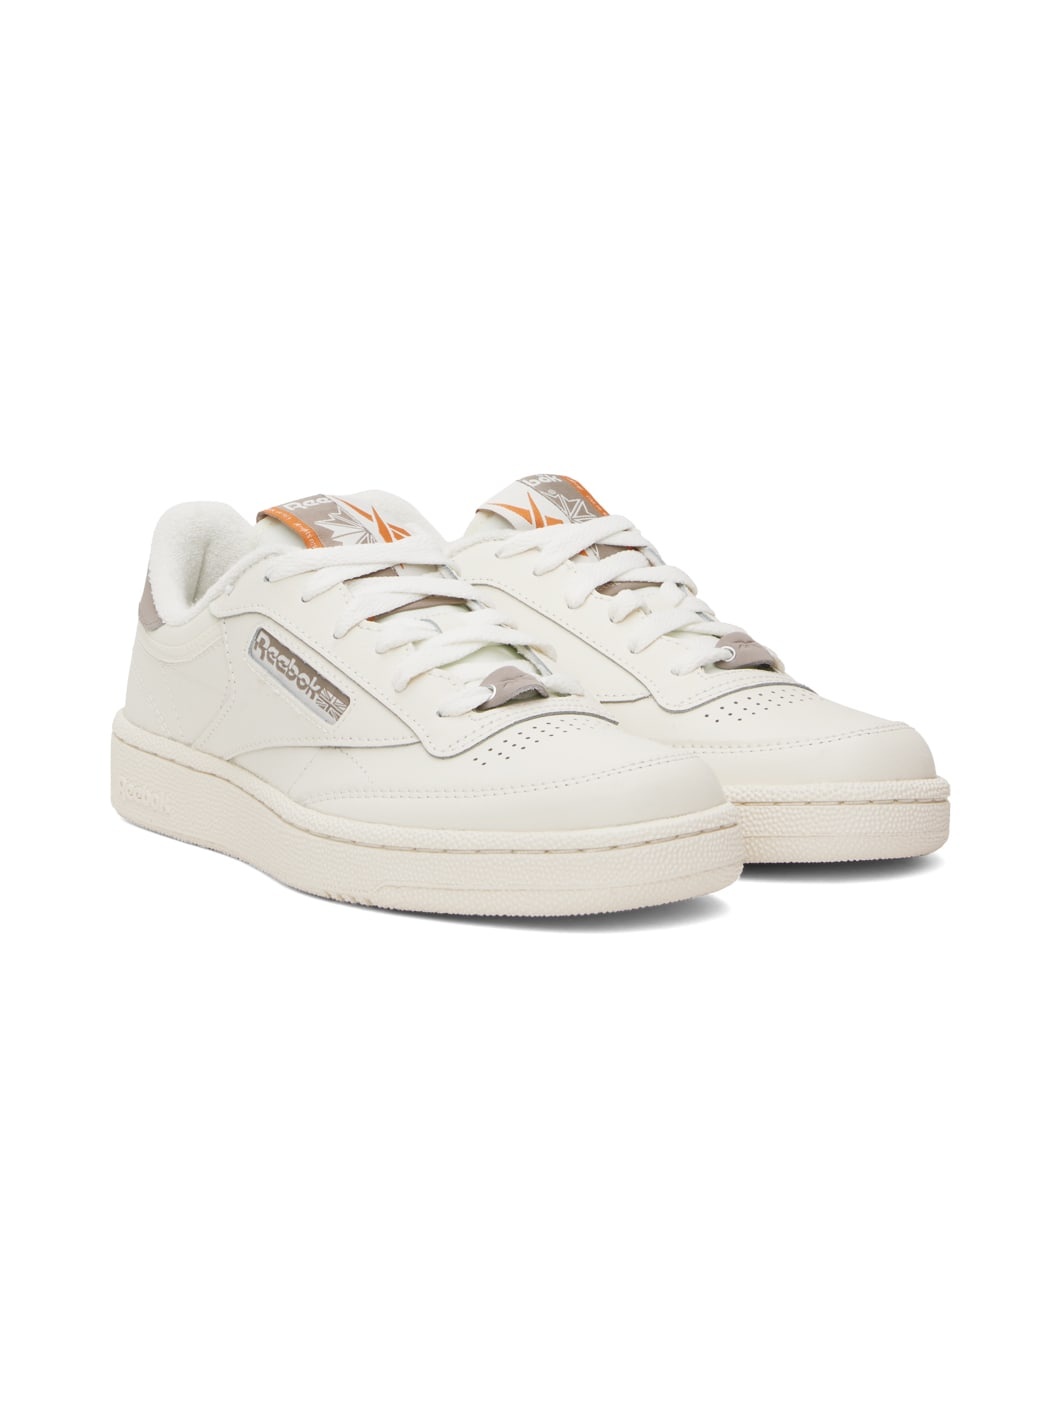 Off-White & Gray Club C 85 Sneakers - 4